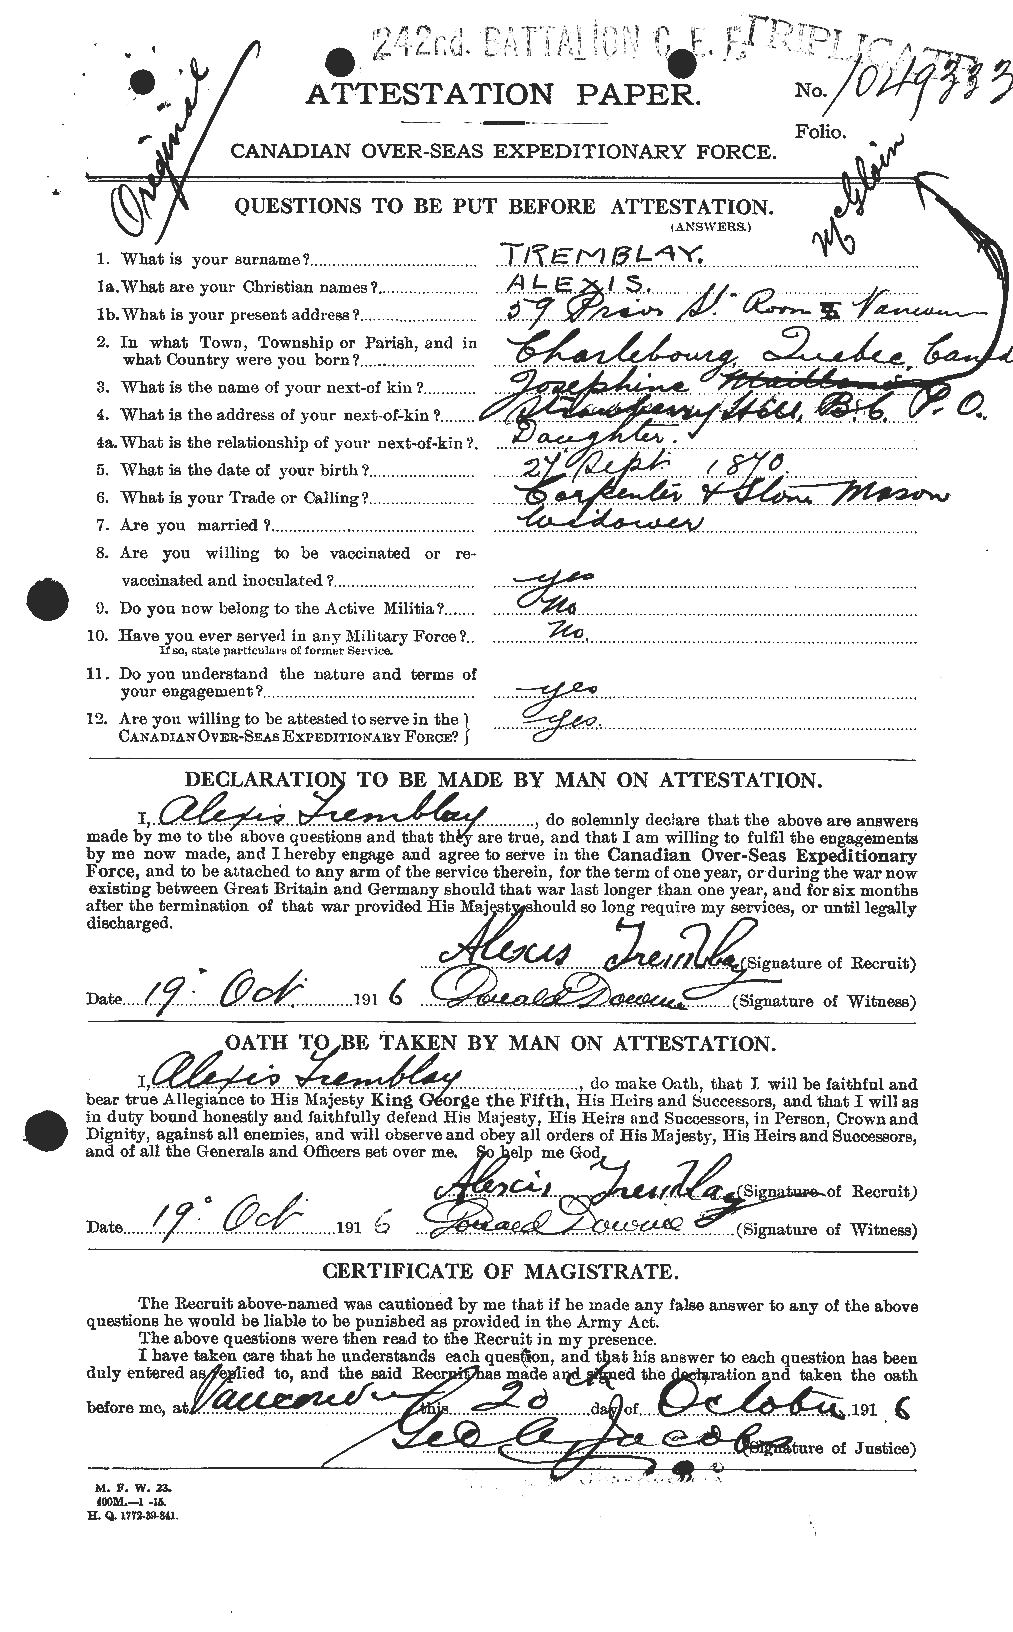 Personnel Records of the First World War - CEF 638911a